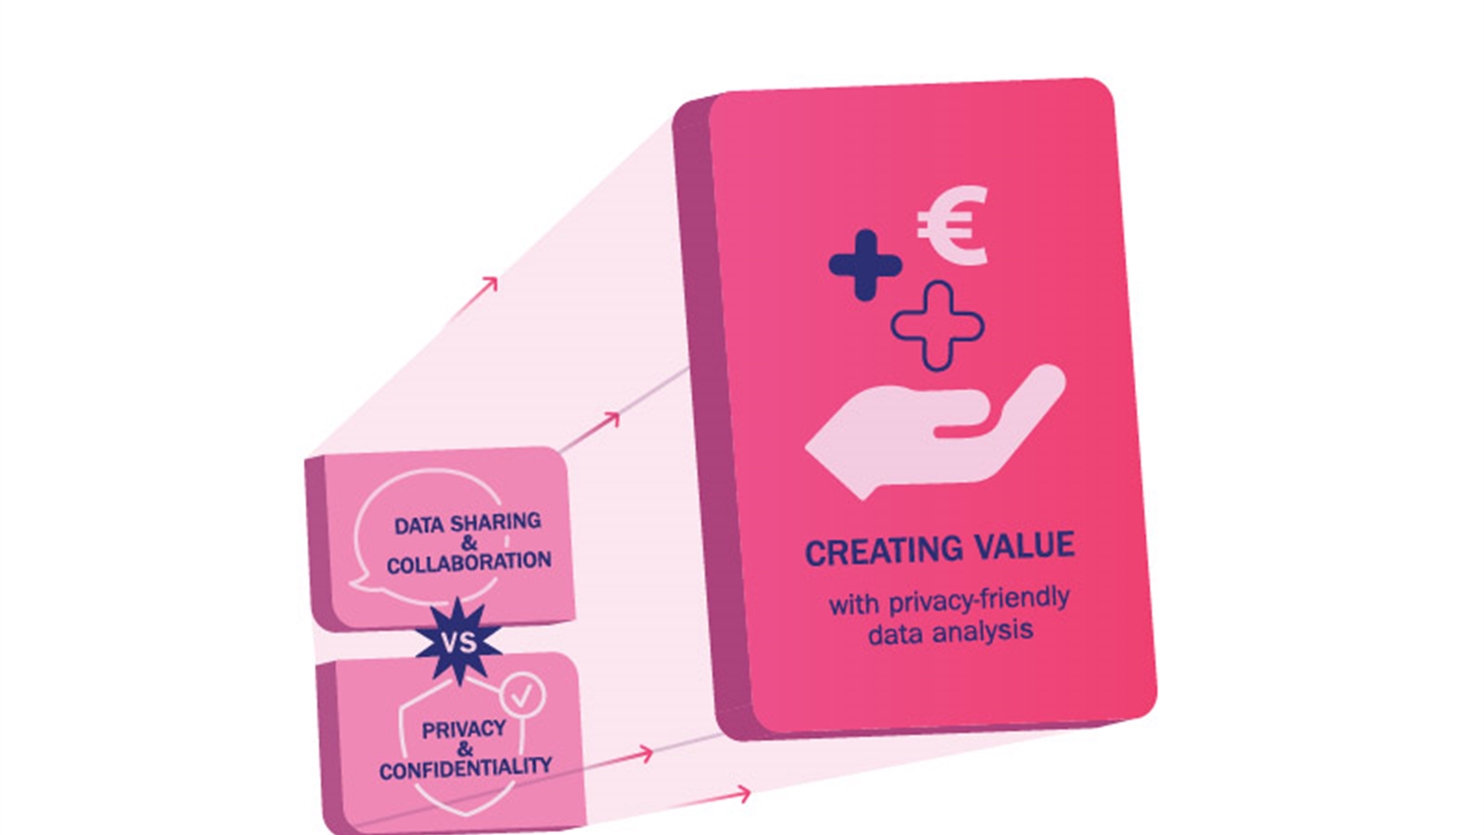 Creating value with privacy-friendly analytics